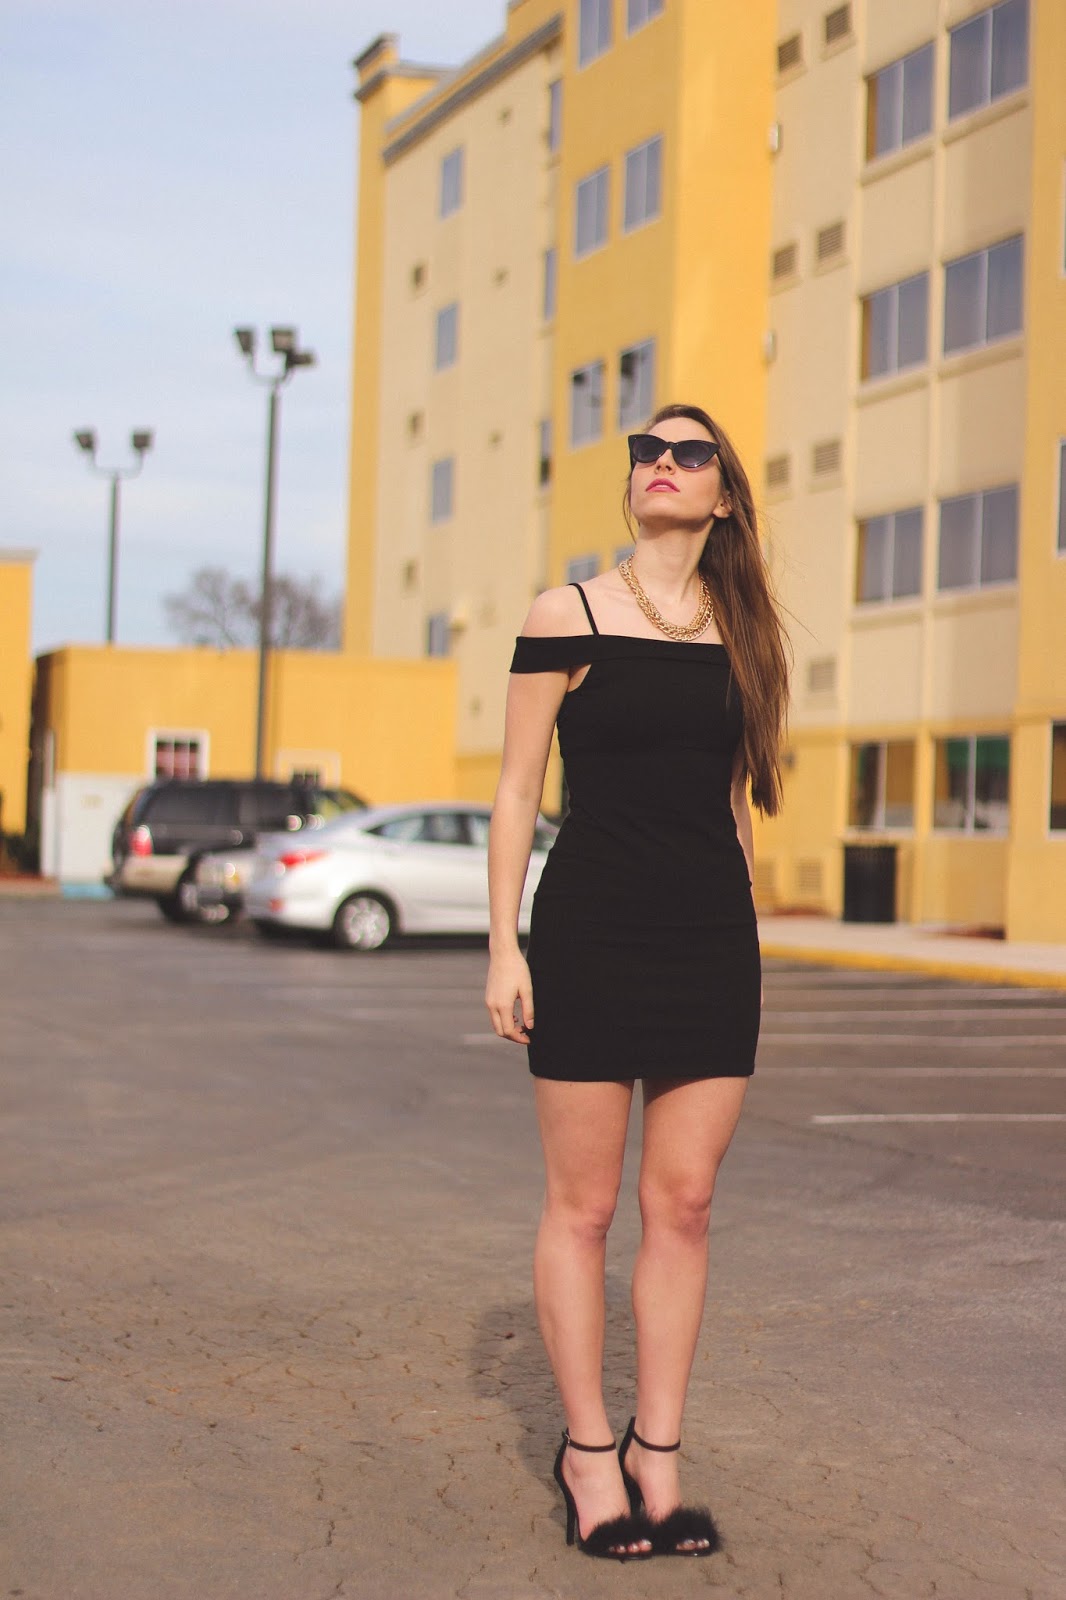 Retro Black and Gold Outfit, Black Off the Shoulder Dress, Lana del Rey Style, Californication, Fashion Blogger